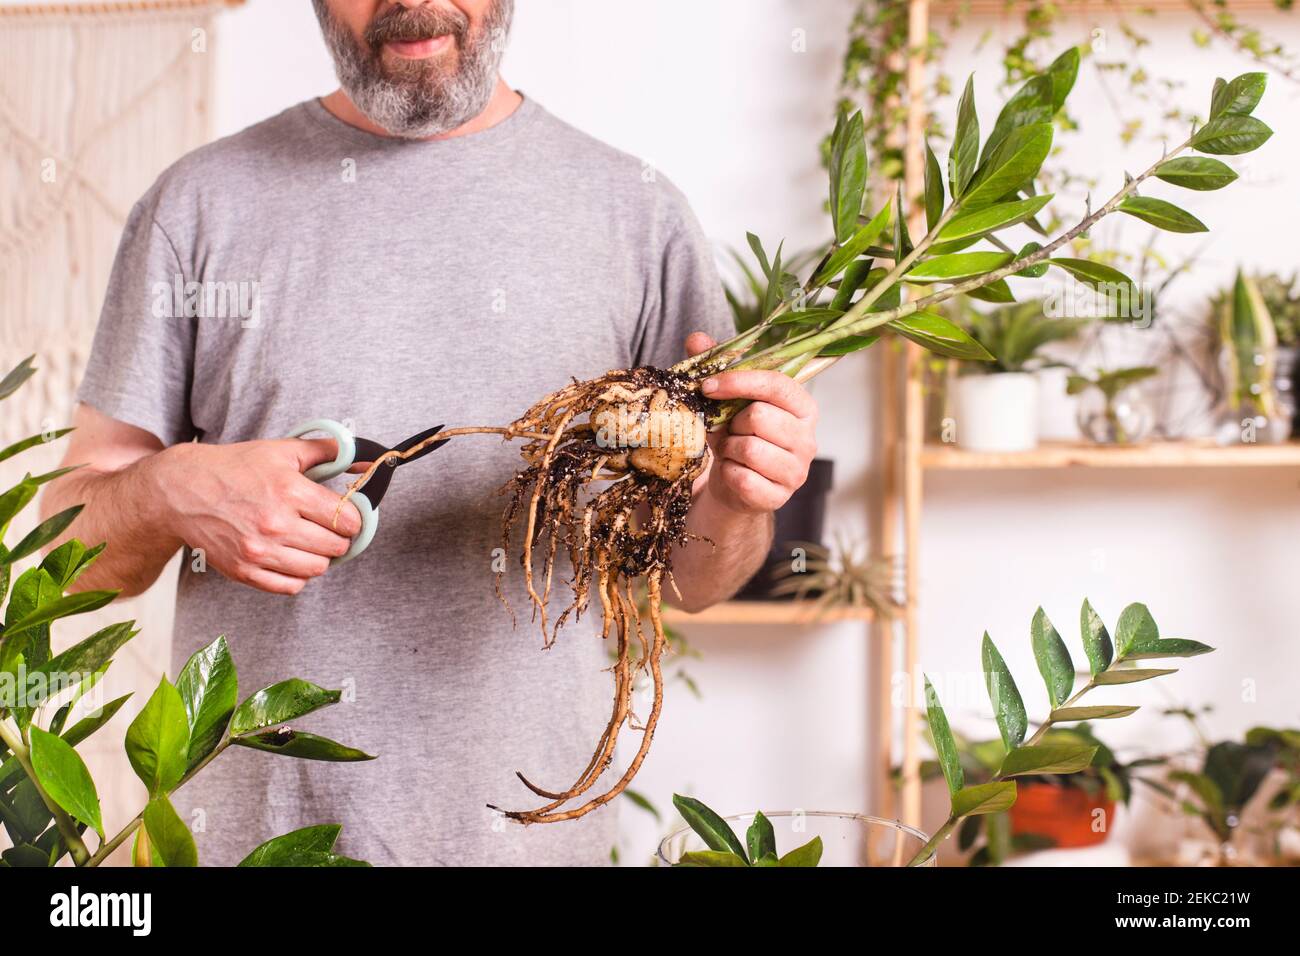 Man cutting grown roots of Zamioculcas Zamiifolia plant while gardening at home Stock Photo